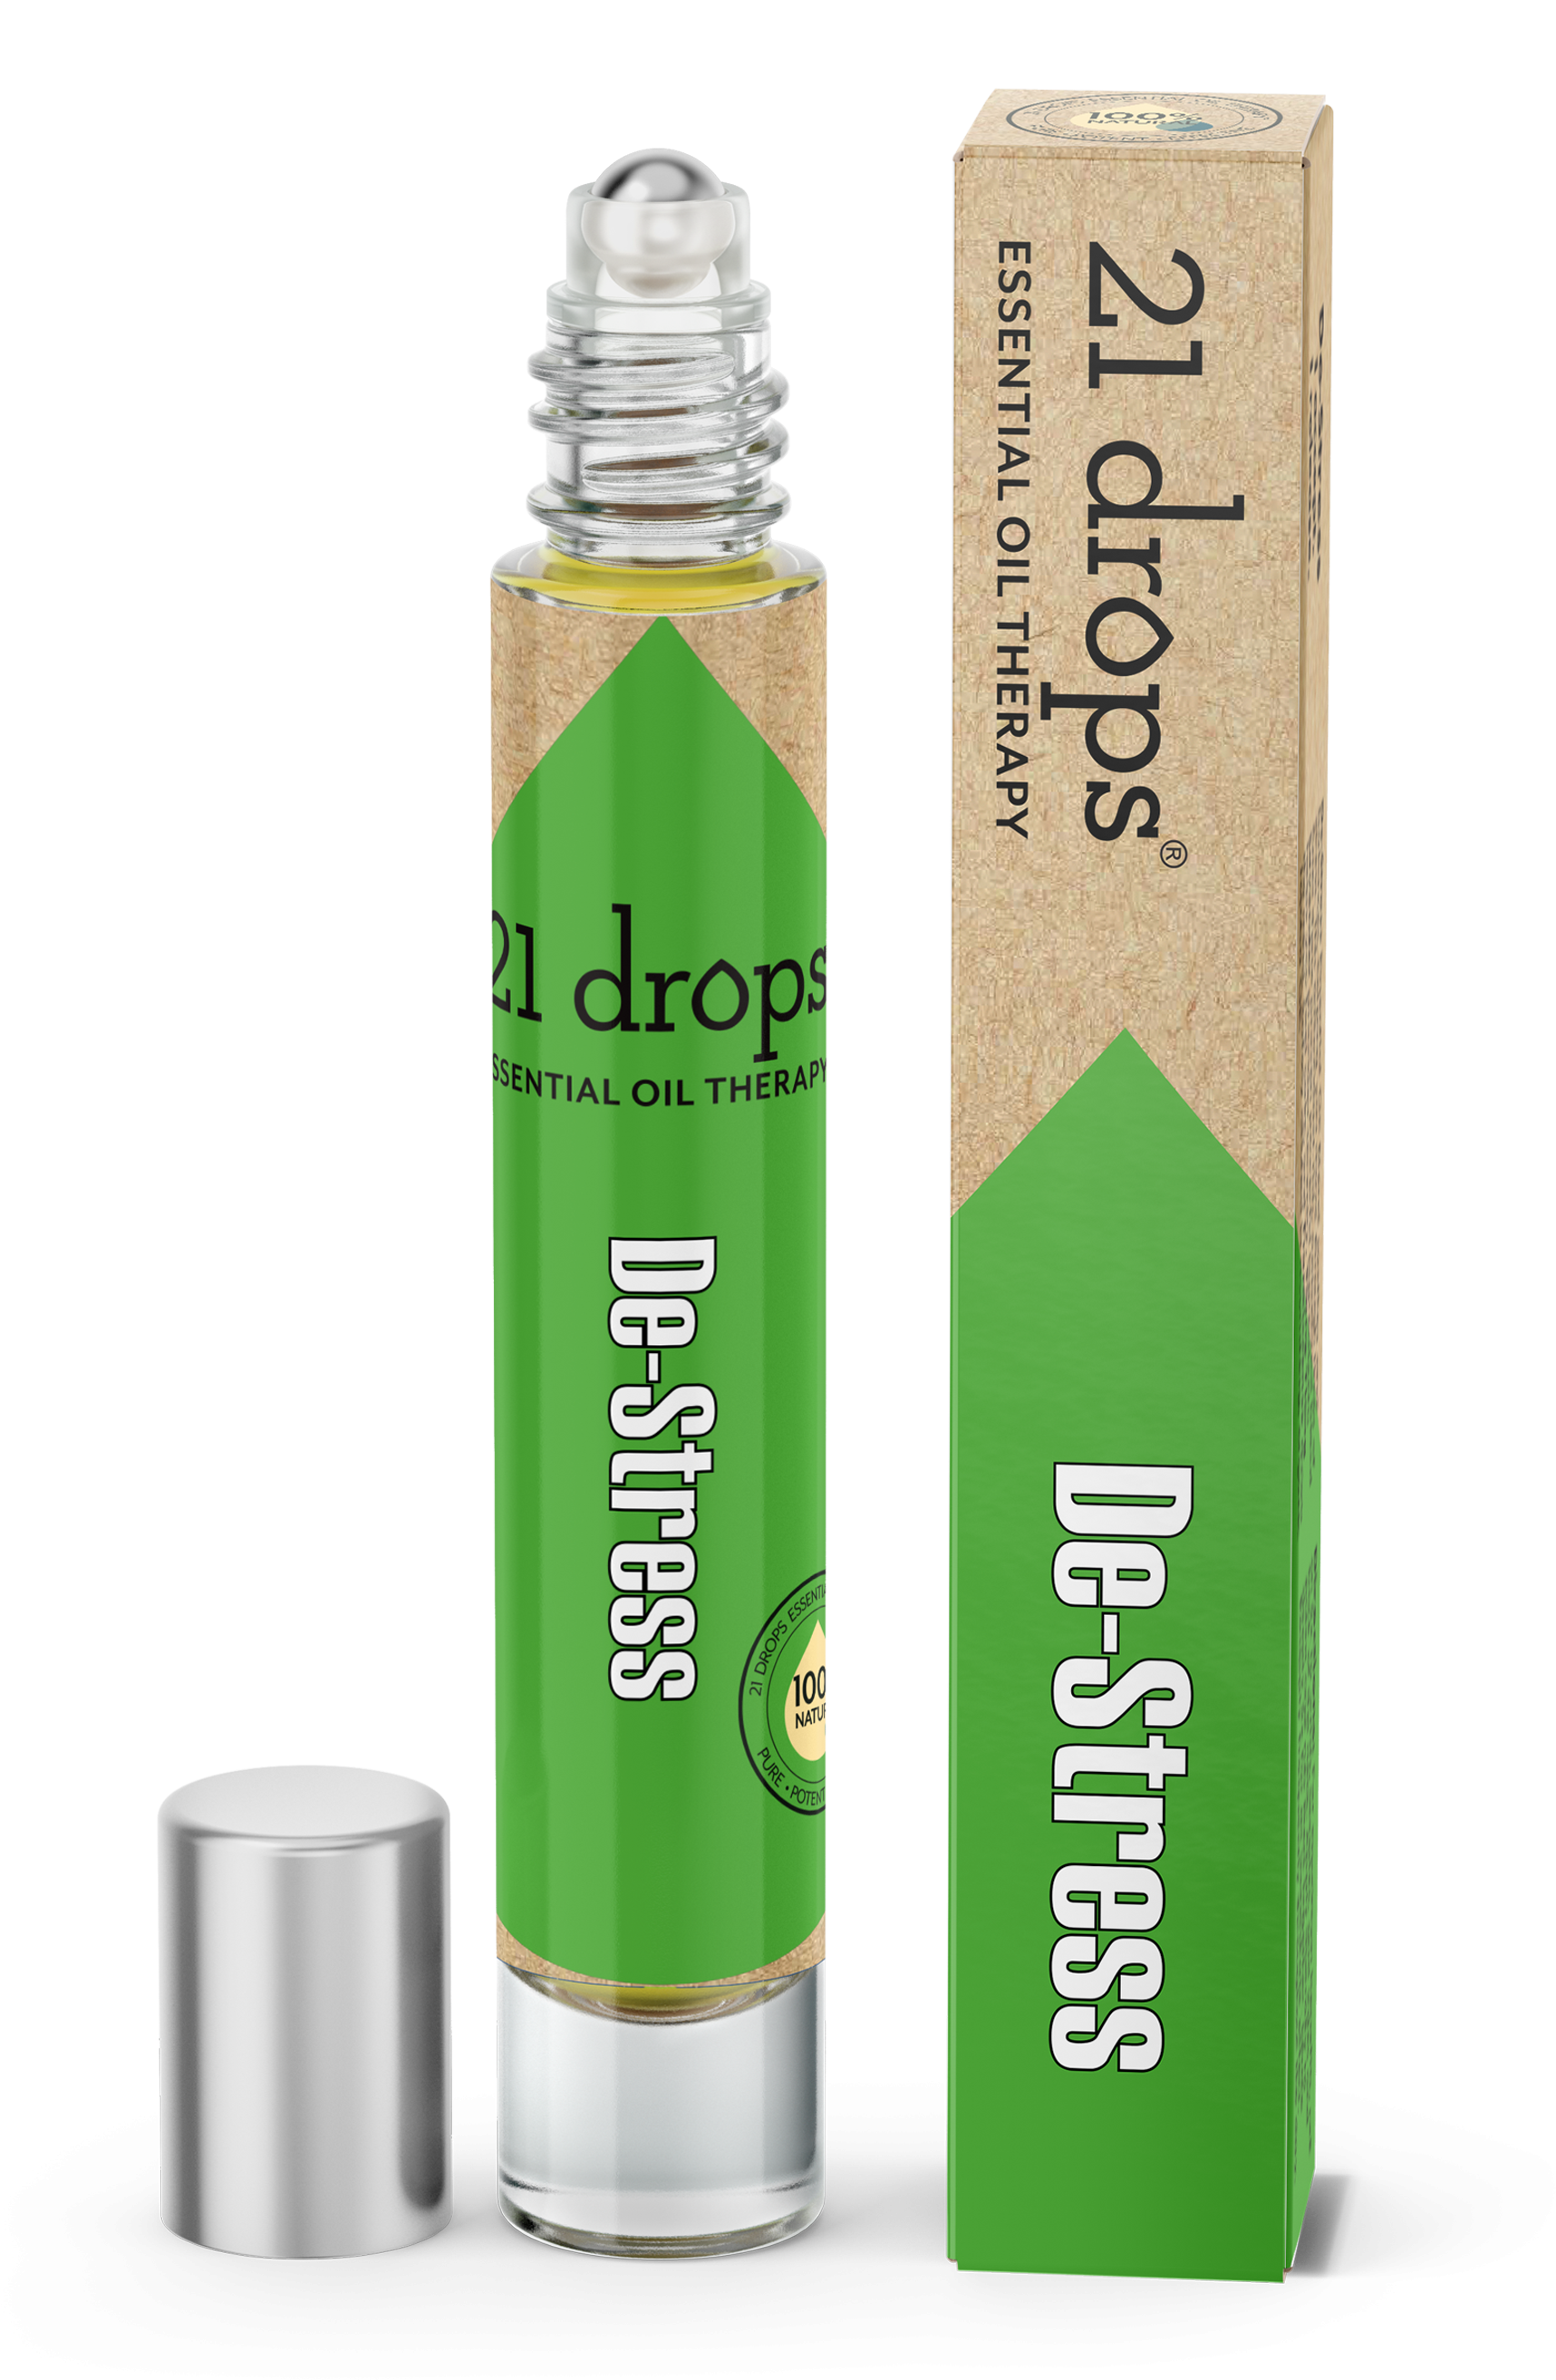 De-stress Roll On - 21 Drops Digest And Immunity Oil Blends (2128x2765), Png Download